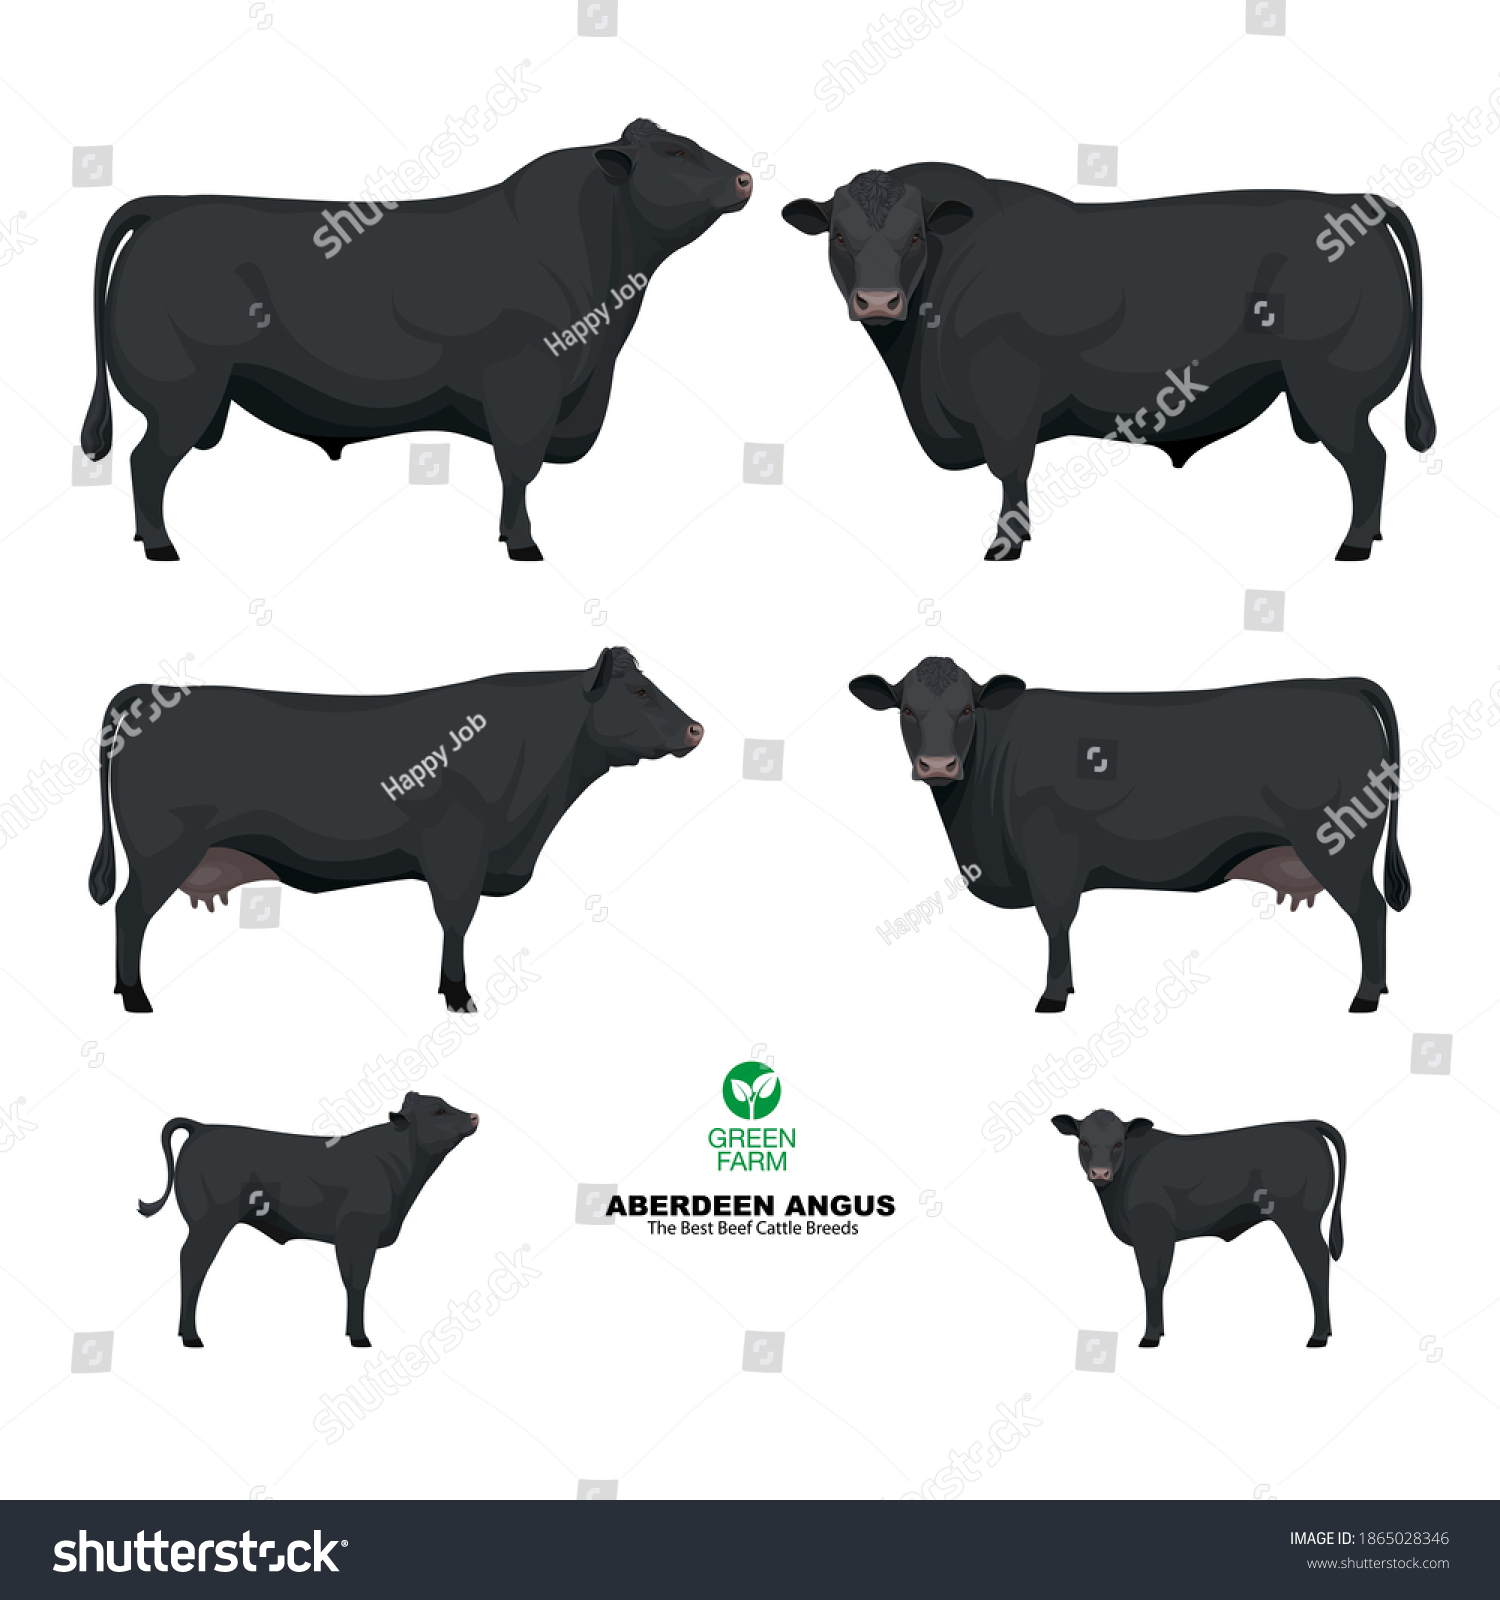 SVG of Aberdeen Angus - The Best Beef Cattle Breeds. Set Bull, Cow, Calf. Farm animals. Vector Illustration. svg